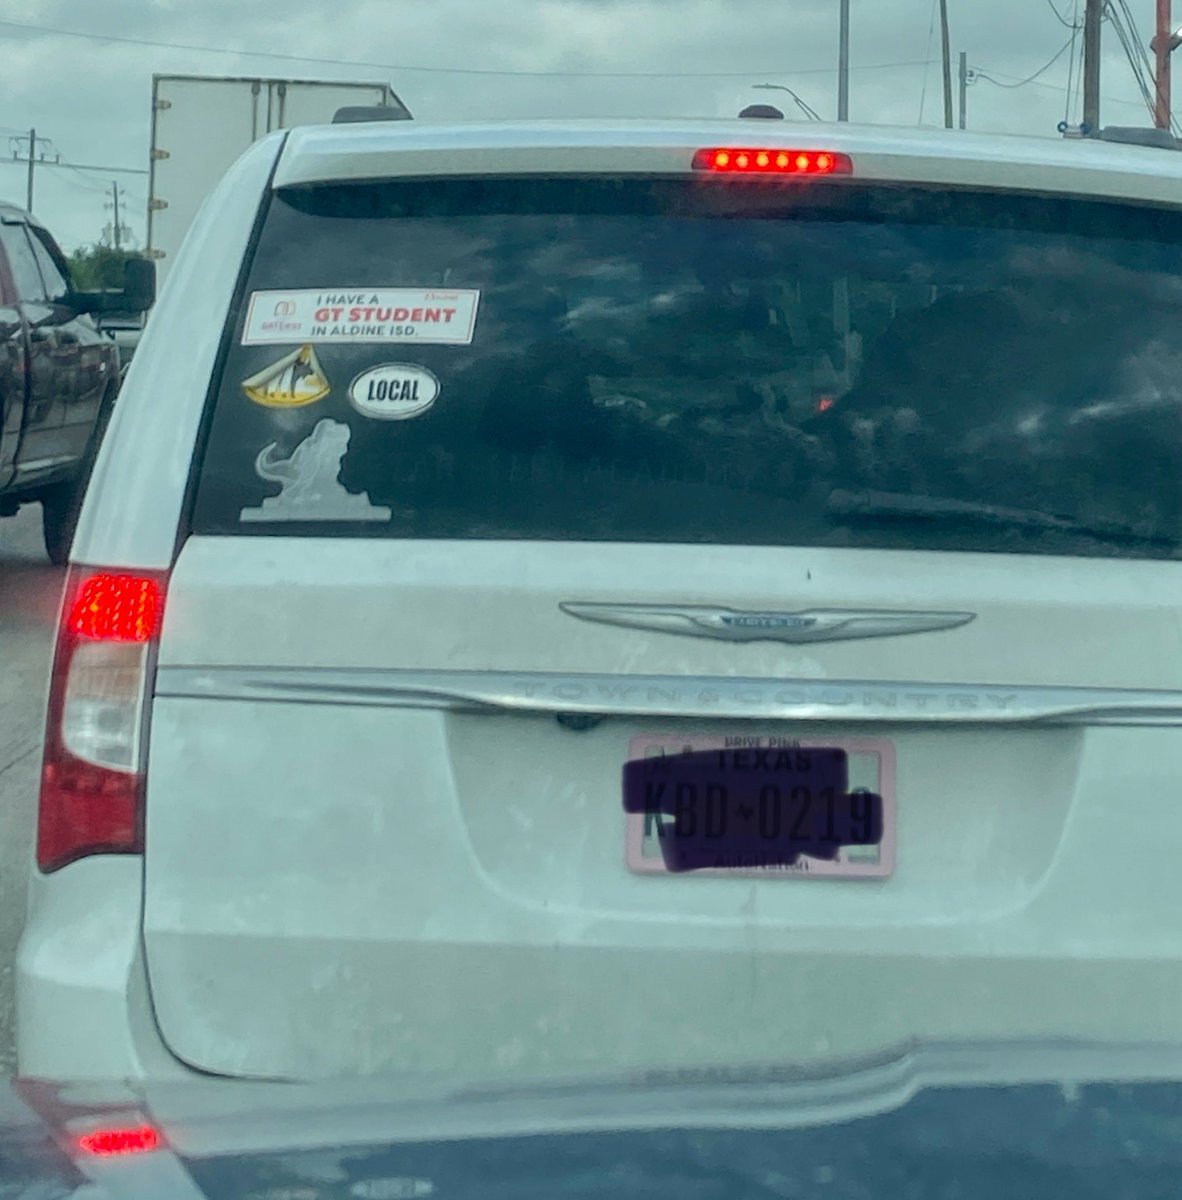 So exciting seeing our GATEway Student bumper stickers in the ⁦@AldineISD⁩ community. Thanks ⁦@NewmanKaileigh⁩ for the pic. #MyAldine #MiAldine